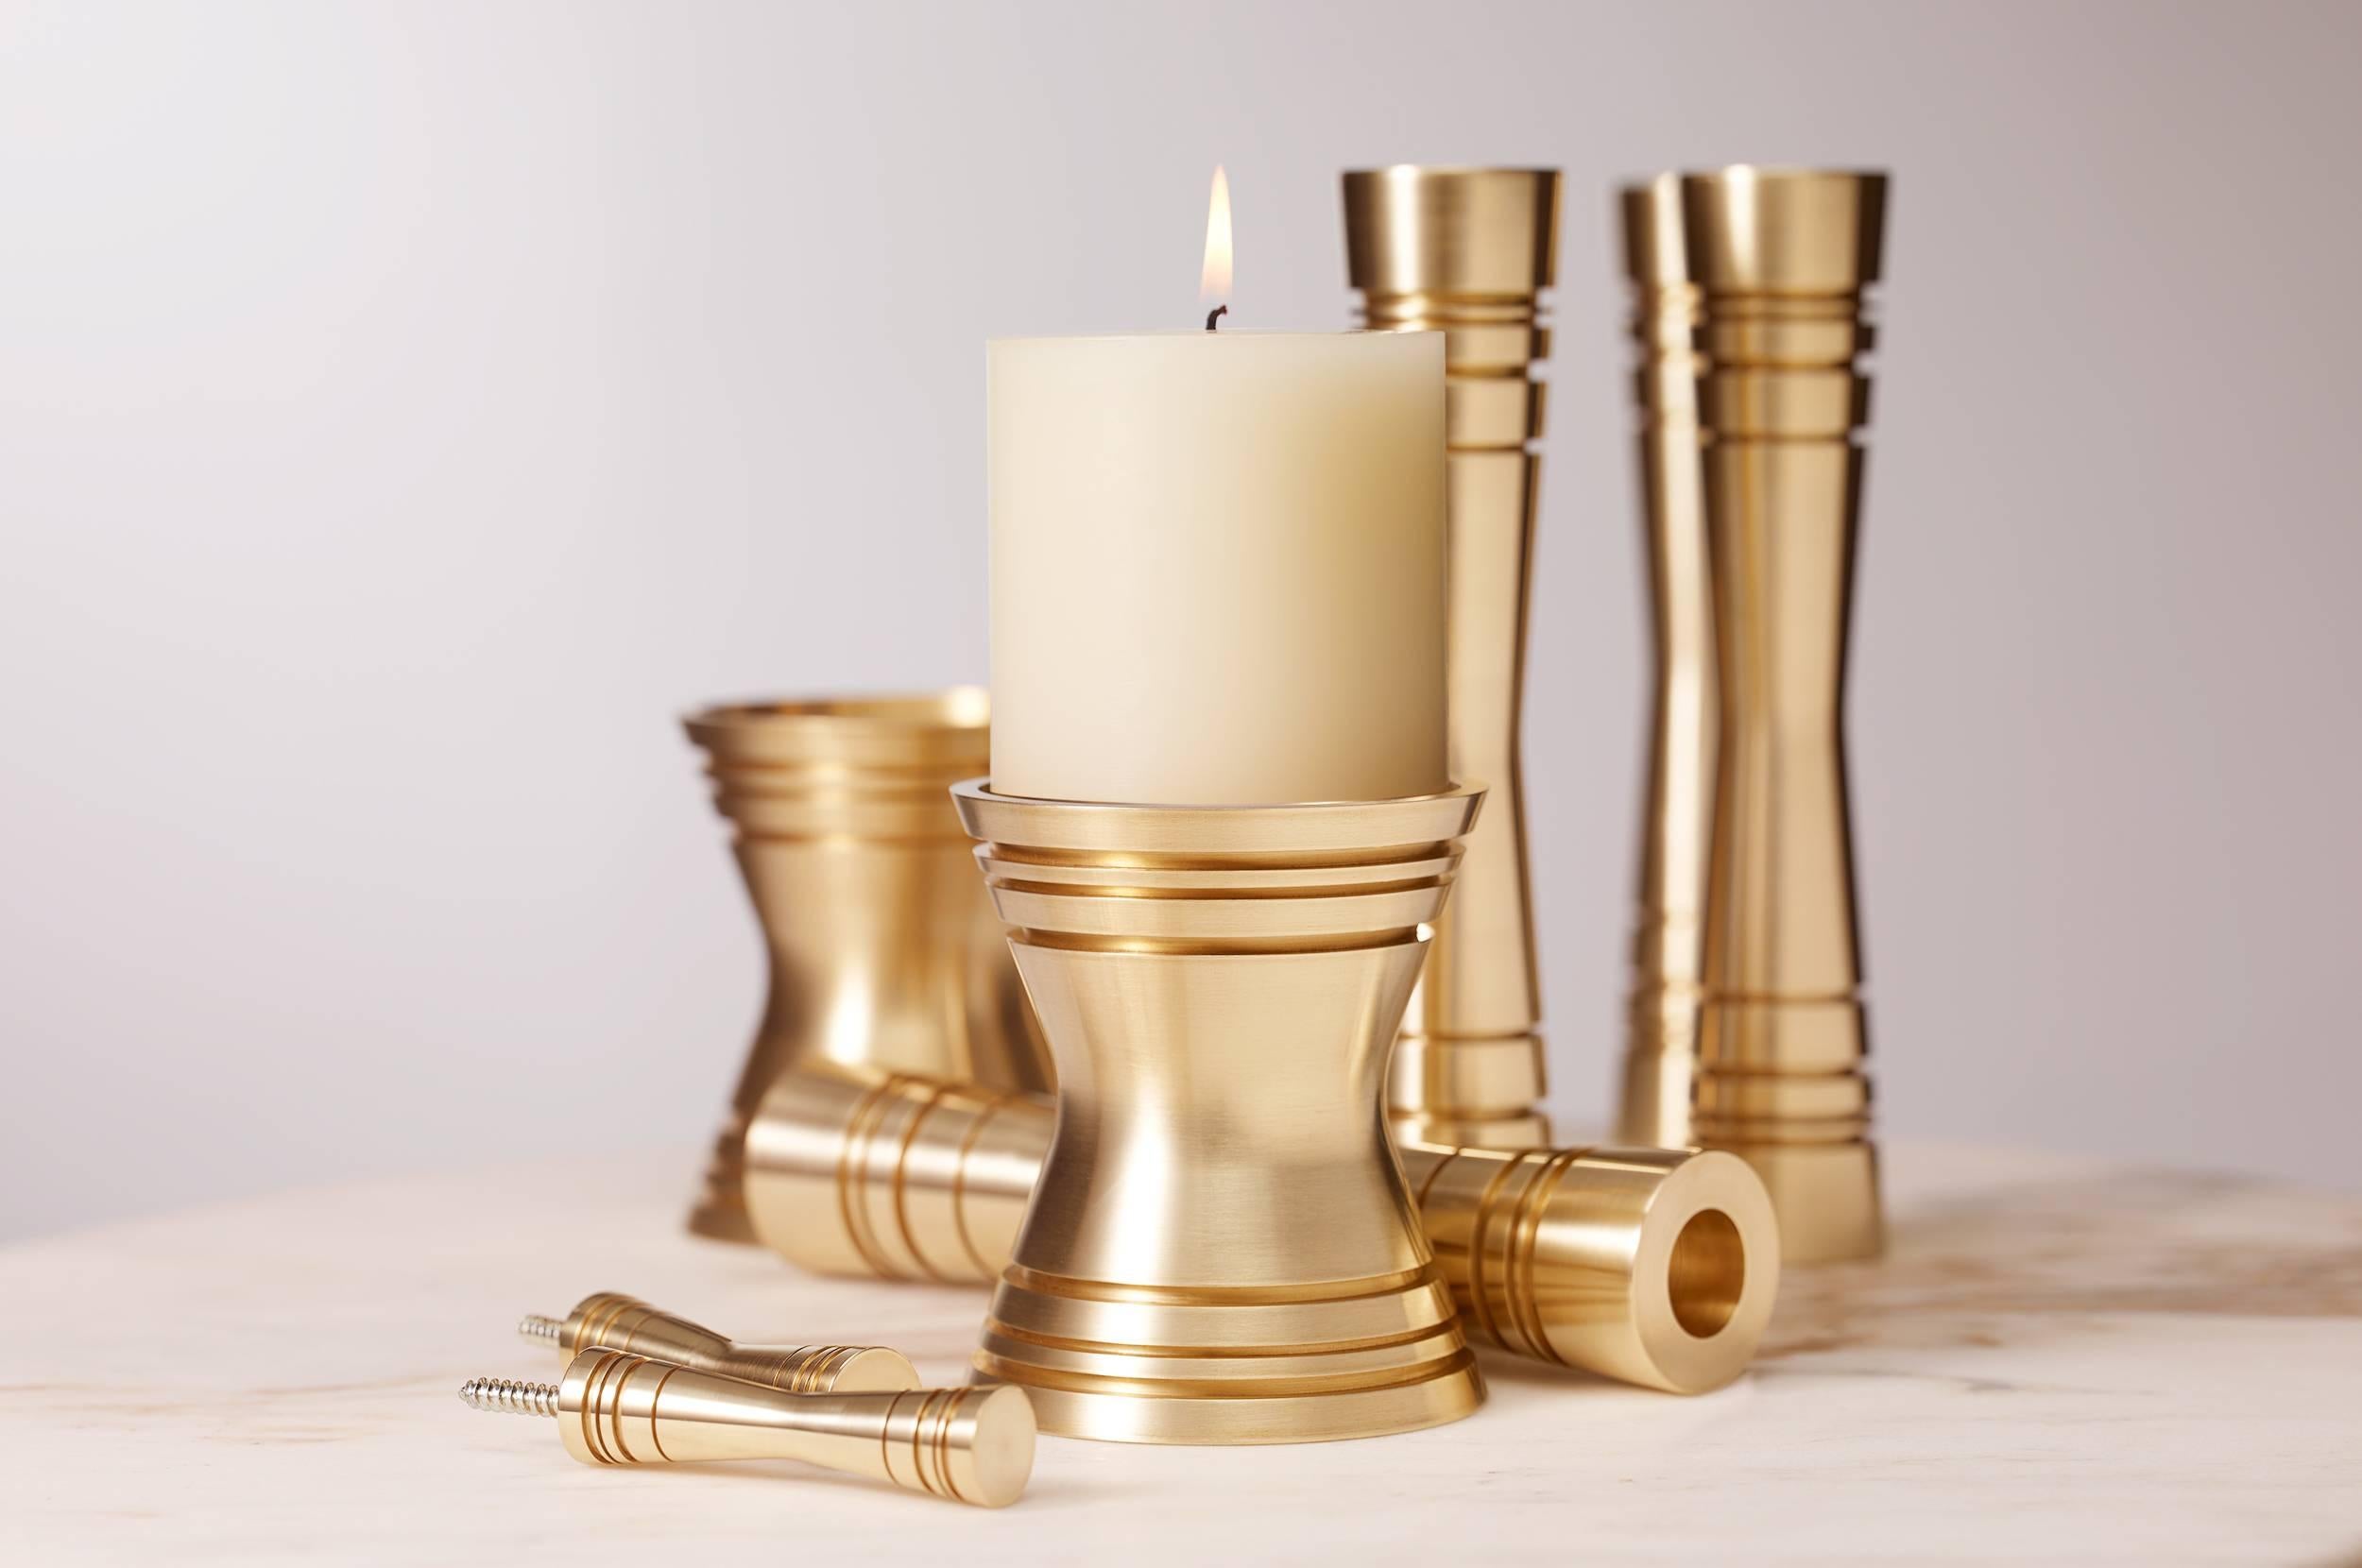 American Double Taper Solid Brass Taper Candleholder 2017 by Post & Gleam For Sale